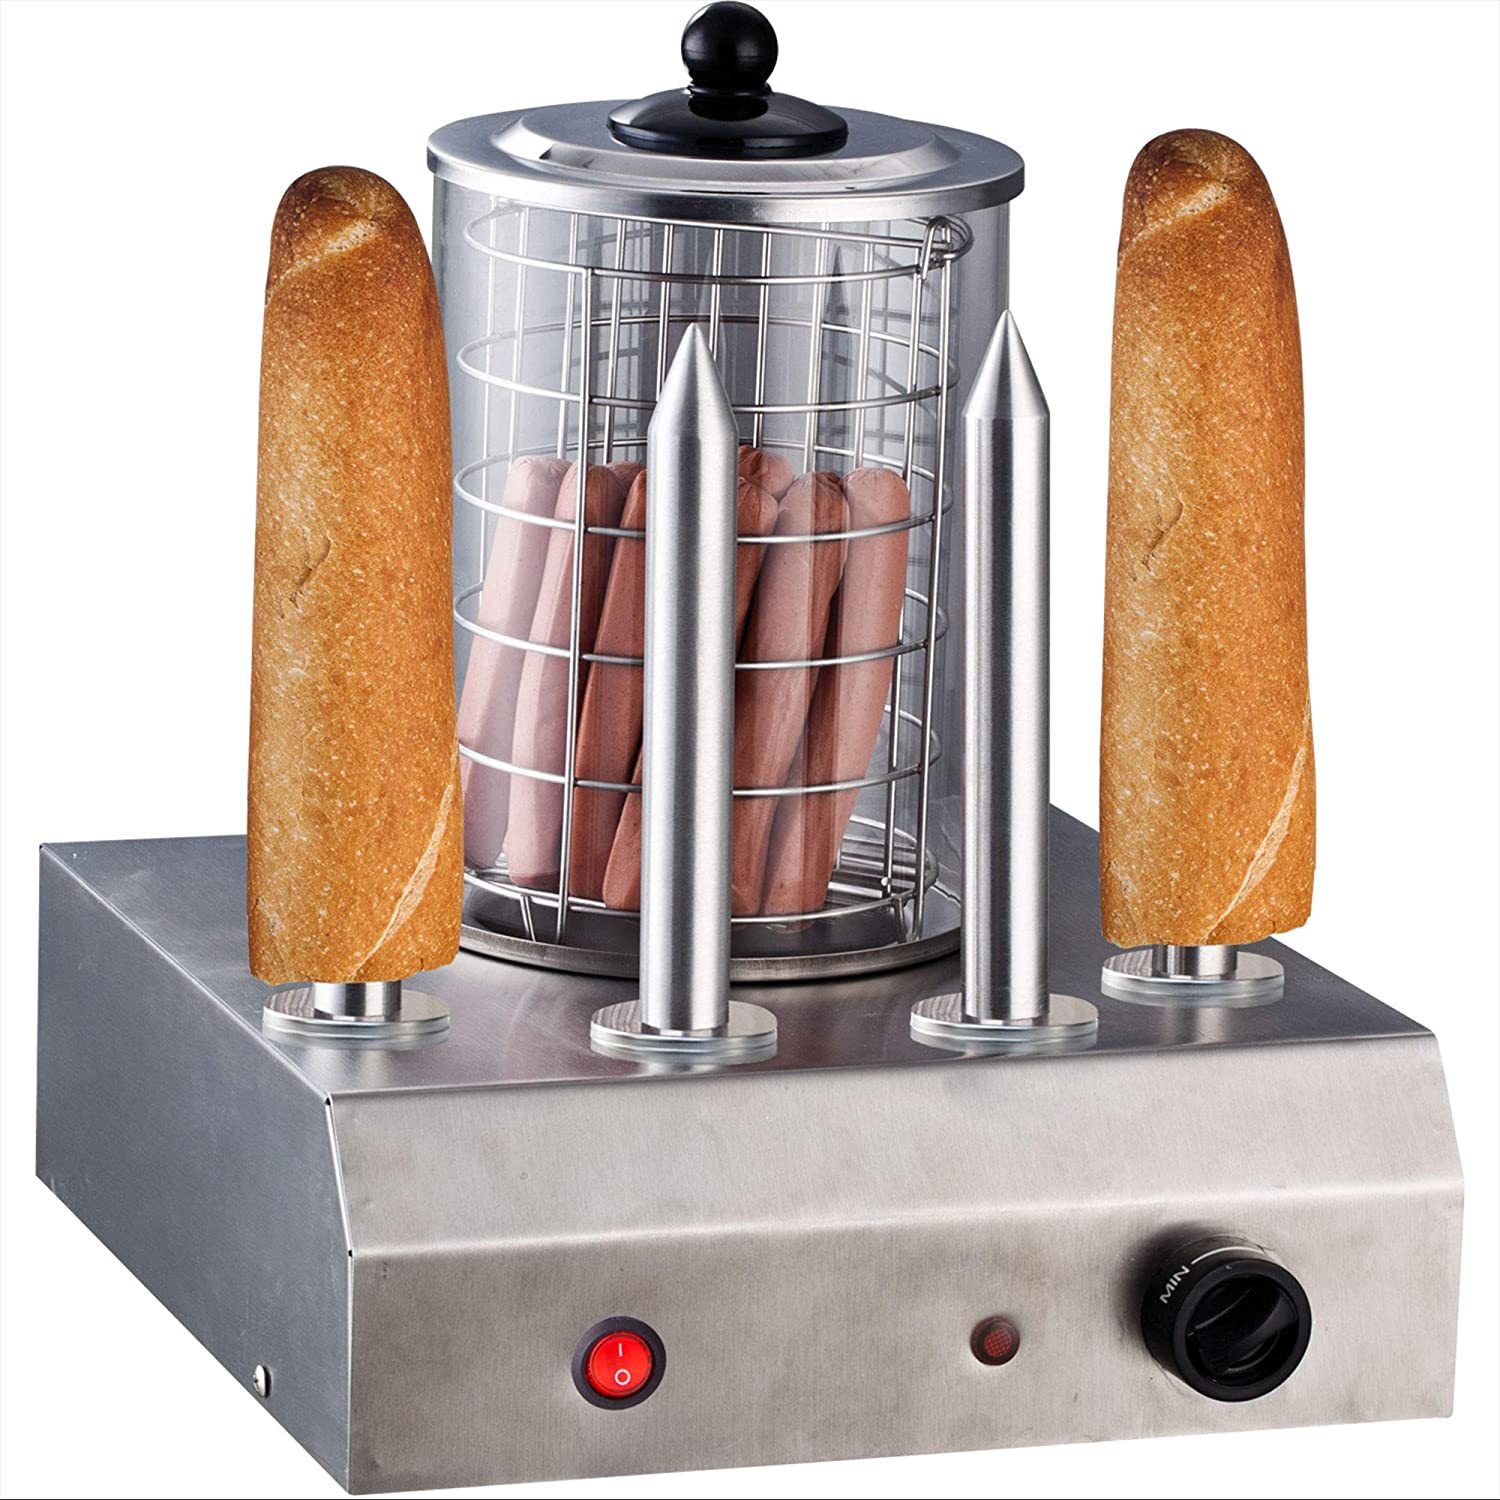 Syntrox Germany Stainless steel hot dog maker, 4 skewers